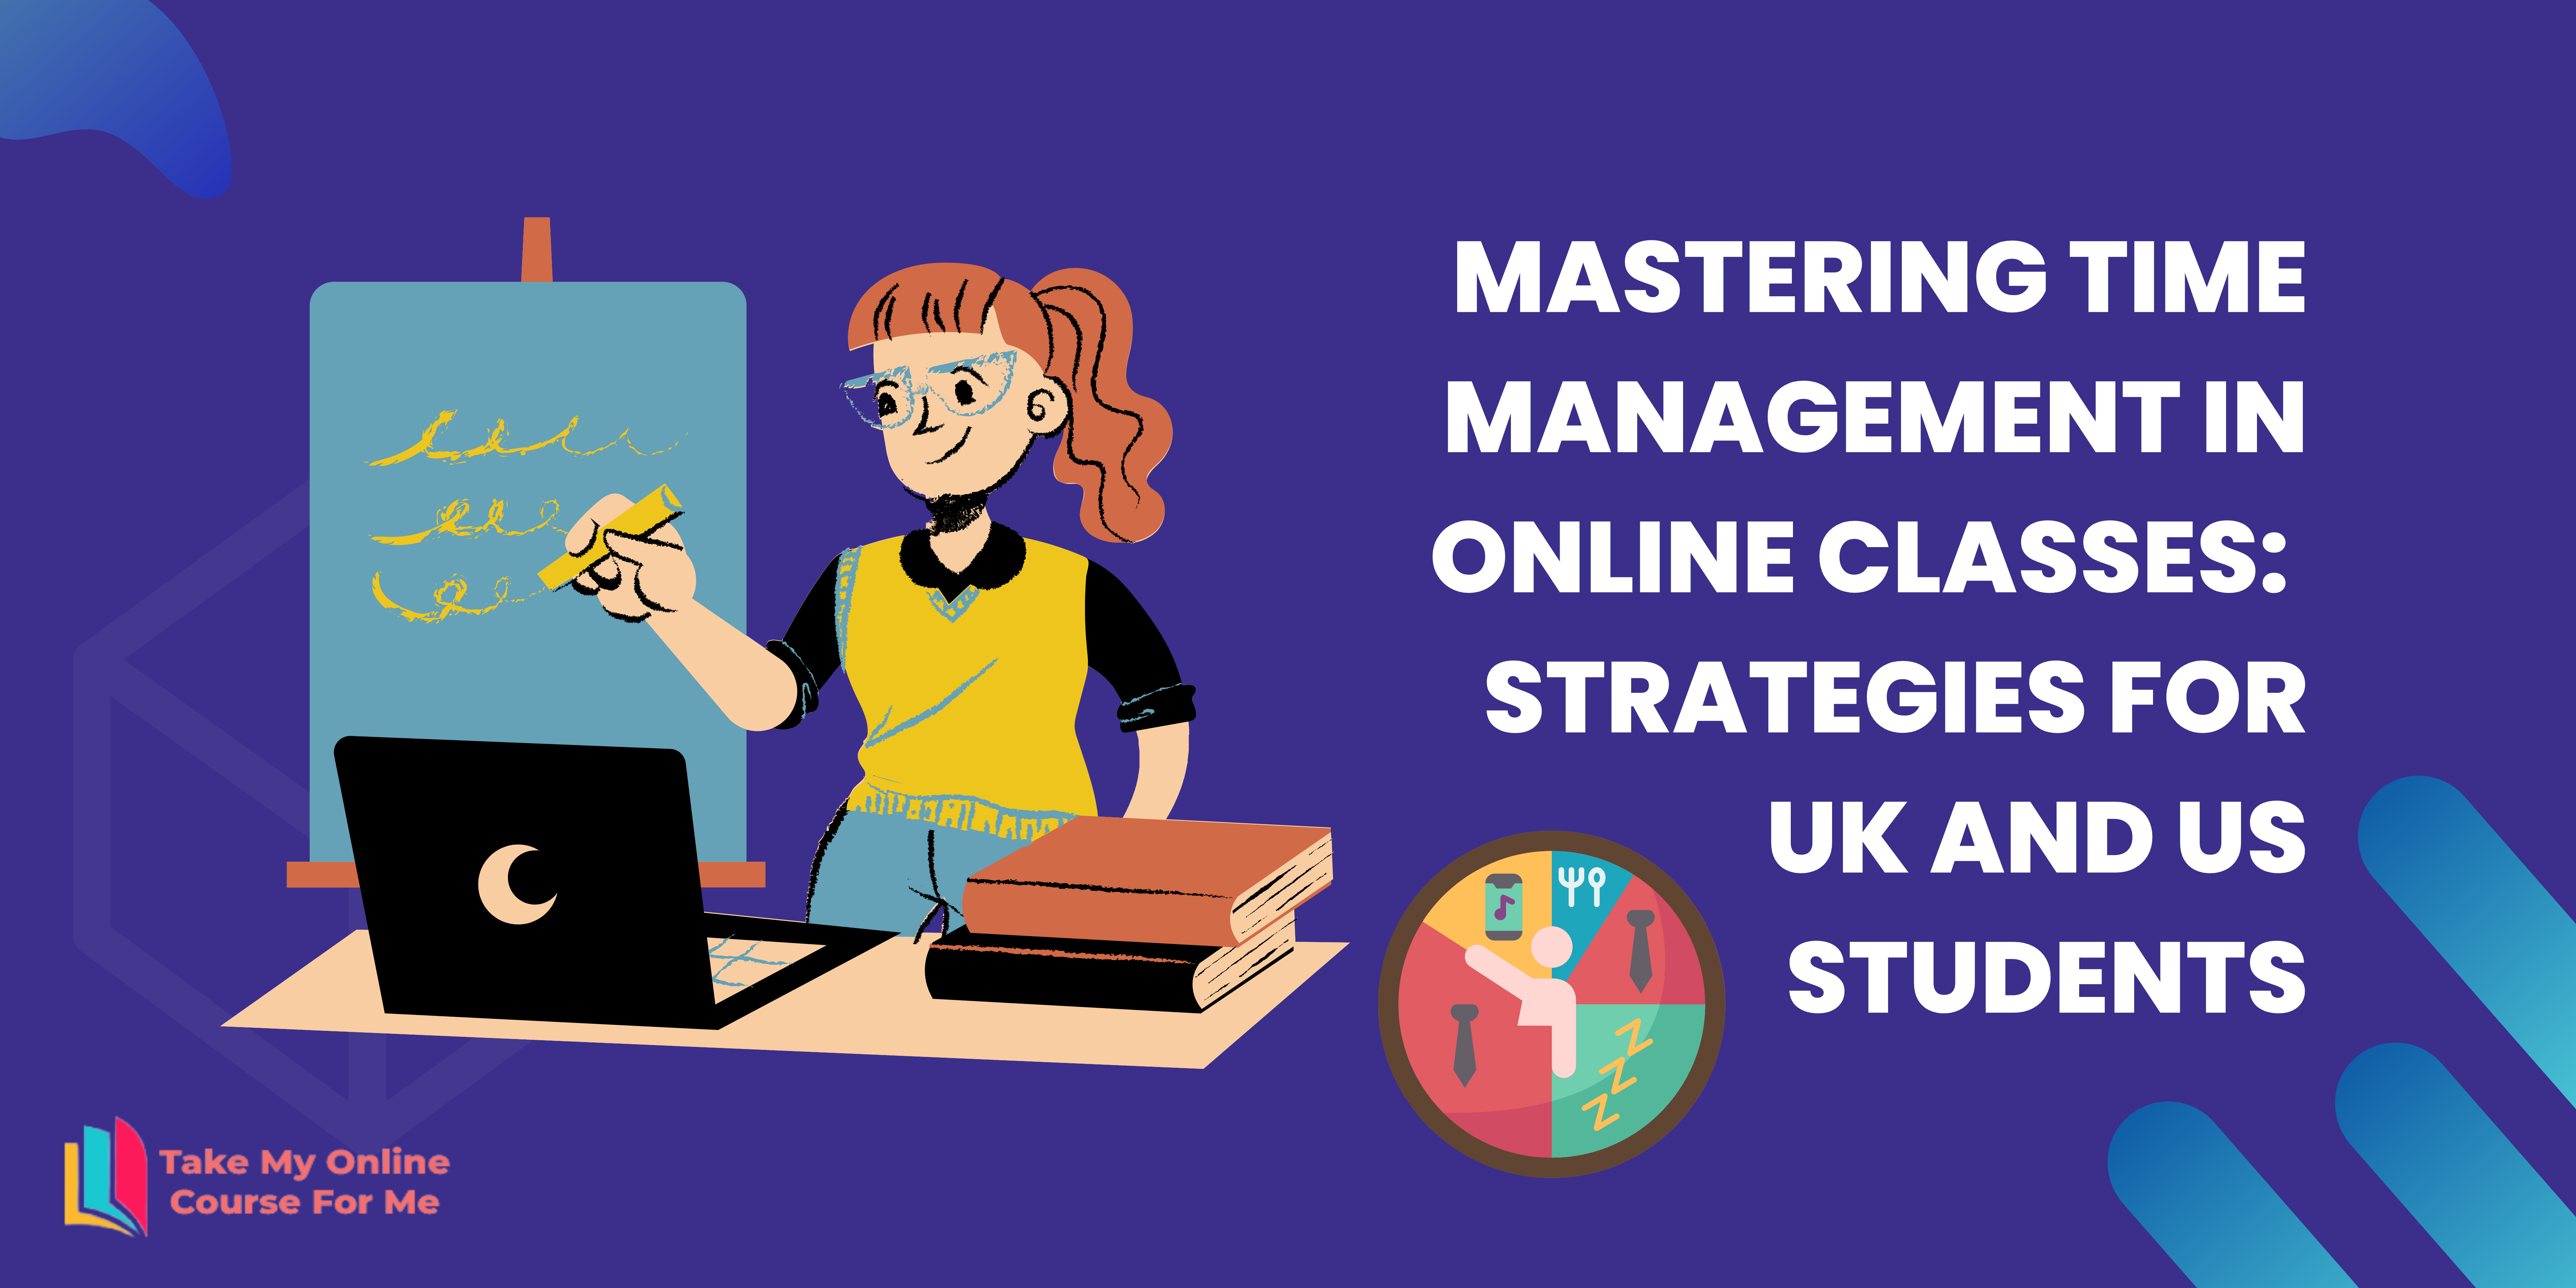 Mastering Time Management in Online Classes Strategies for UK and US Students